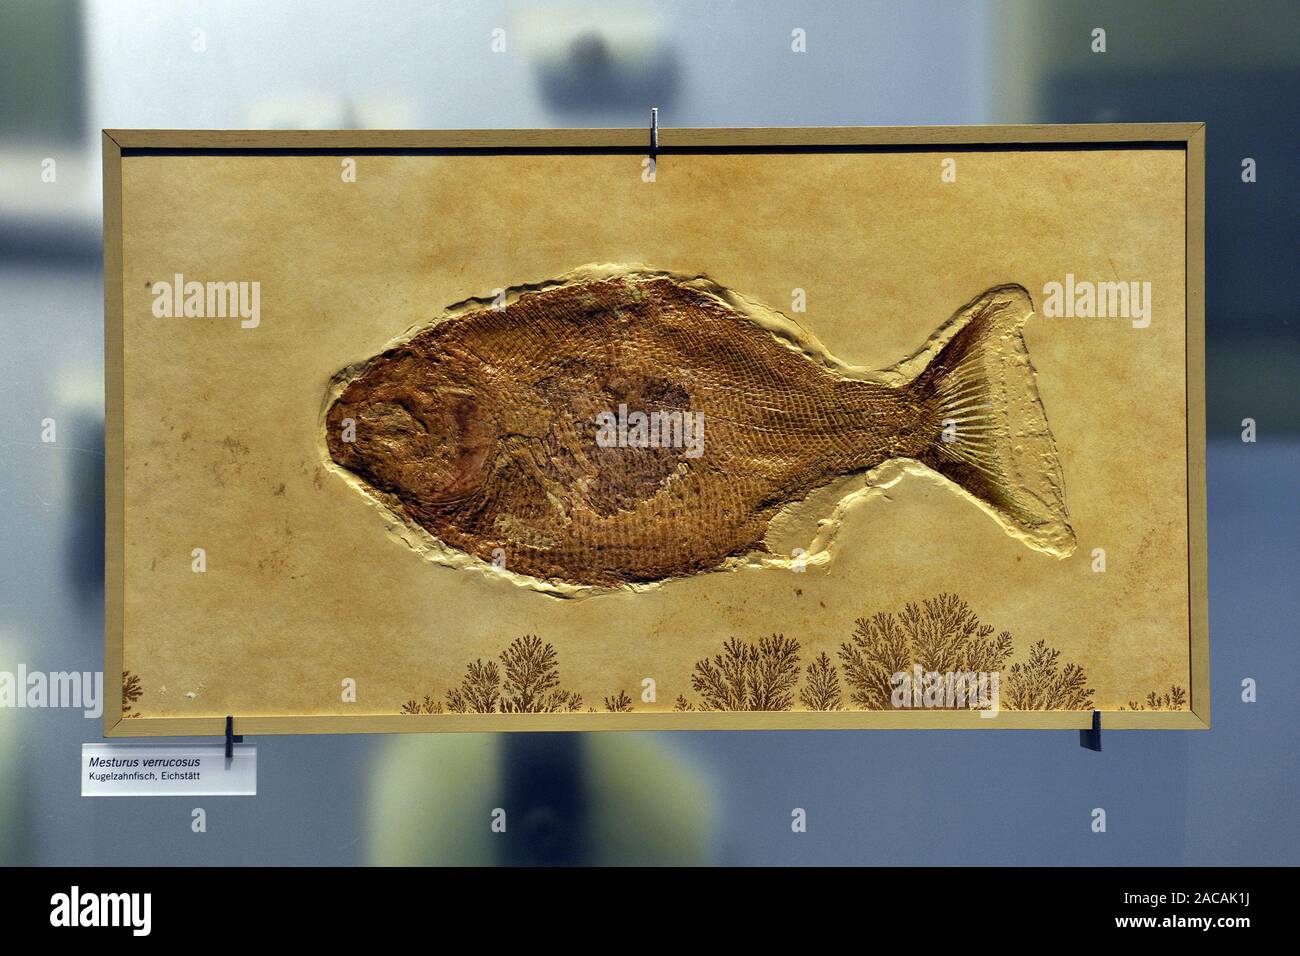 Fossilization of a ball number fish, Mesturus verrucosus, Museum of Natural History in Berlin Stock Photo